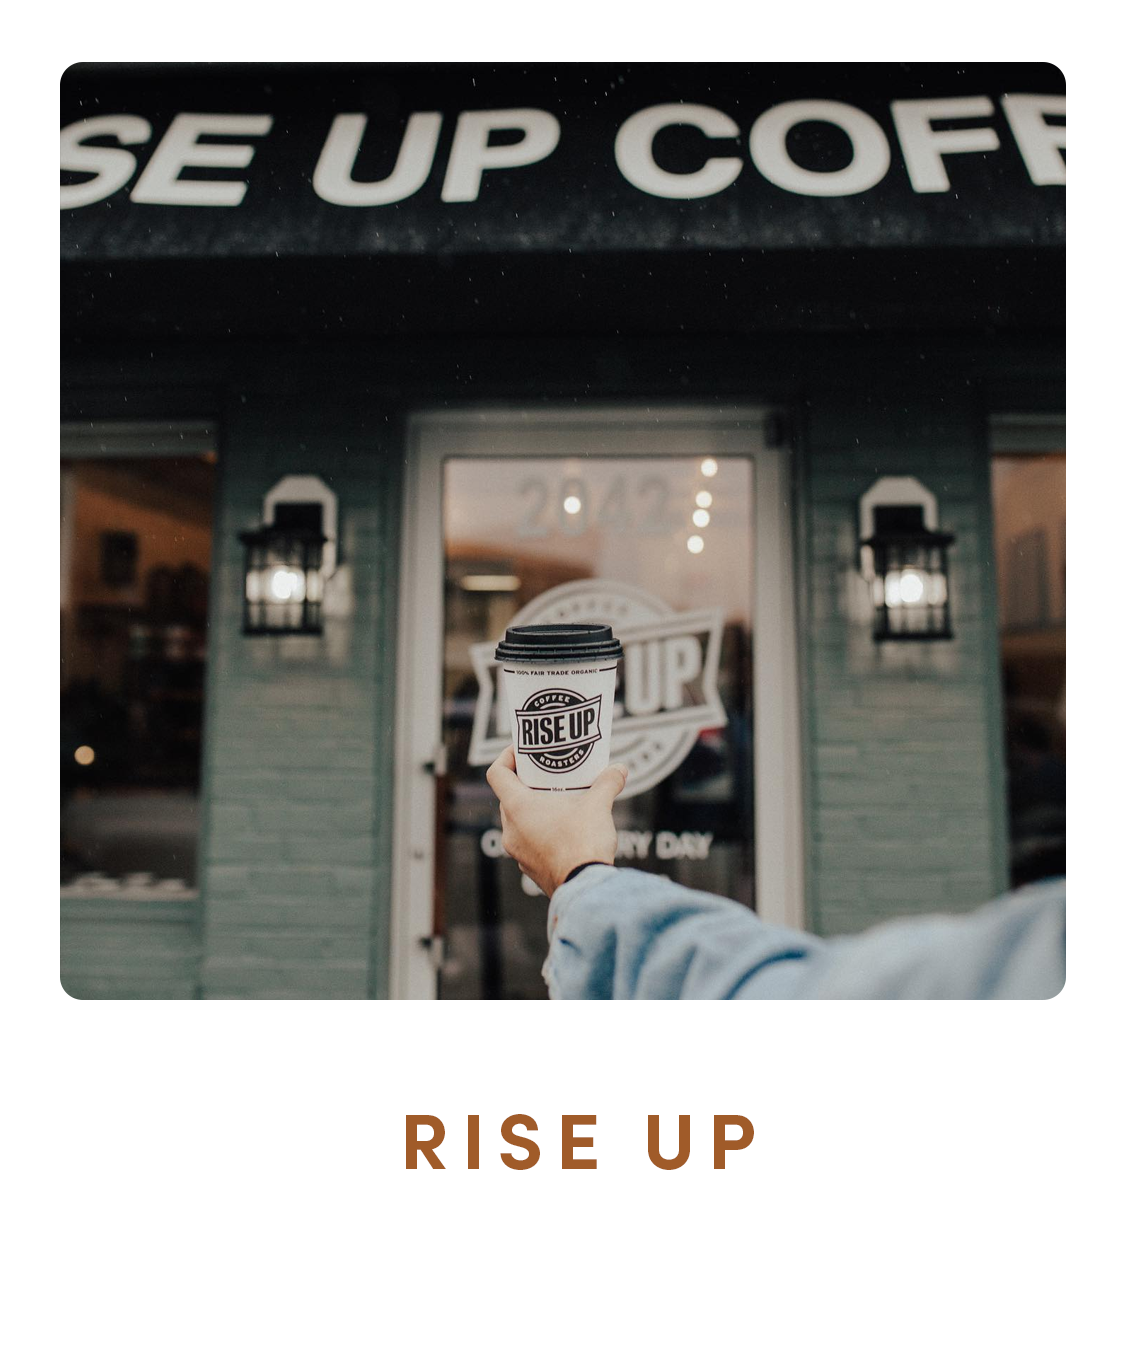 annapolis-coffee-shops-rise-up